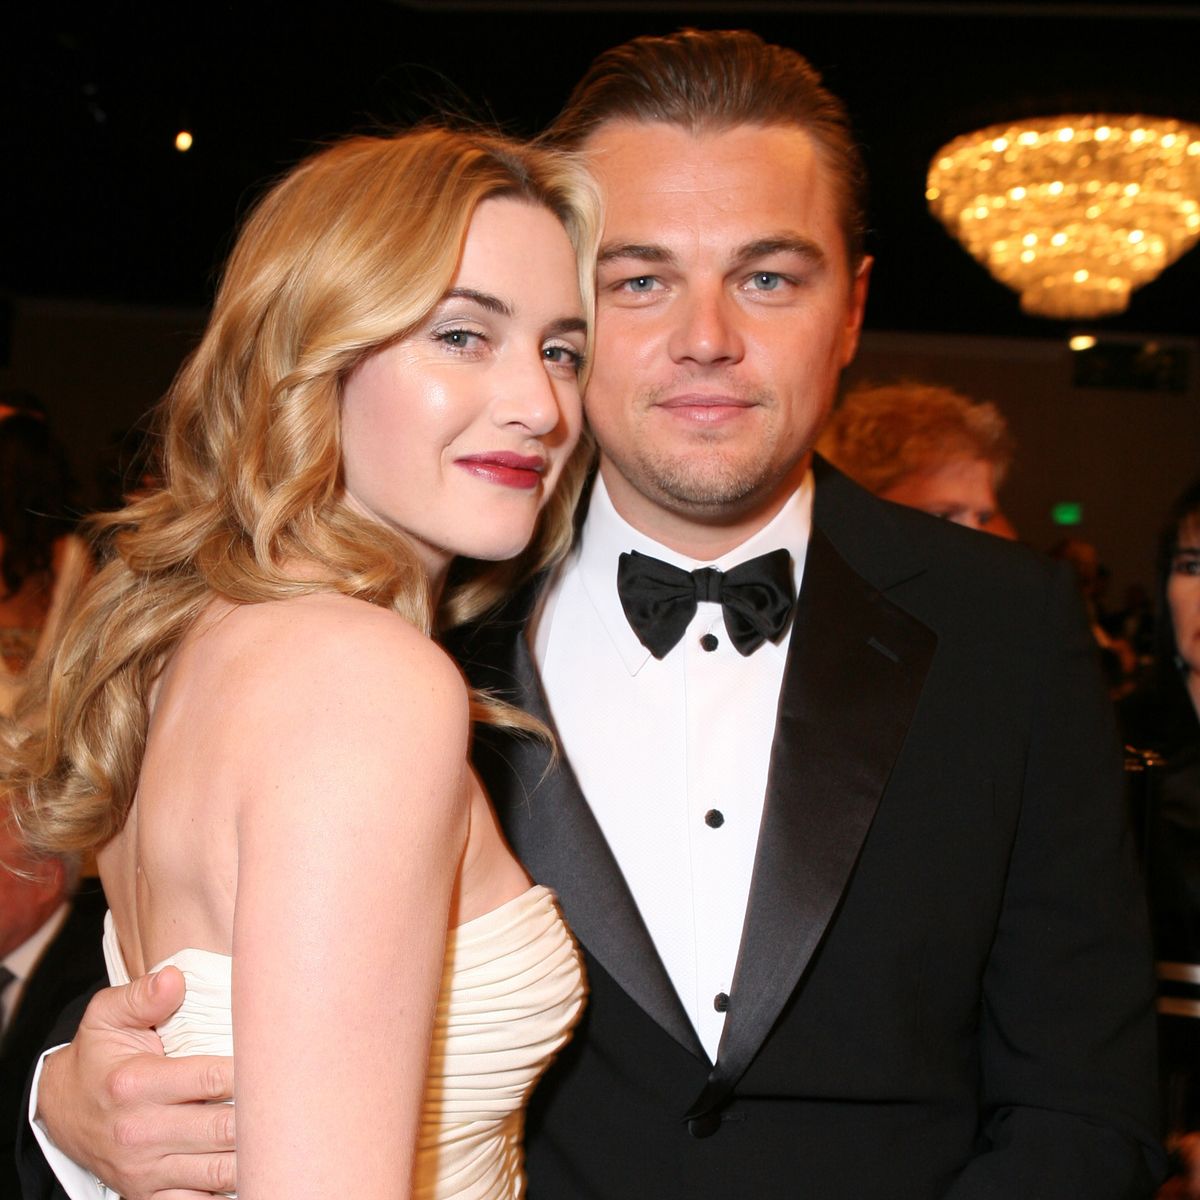 kollision Udfordring diagonal Kate Winslet And Leonardo DiCaprio's Friendship: The British Actor Opens Up  About 'Titanic' Co-Star